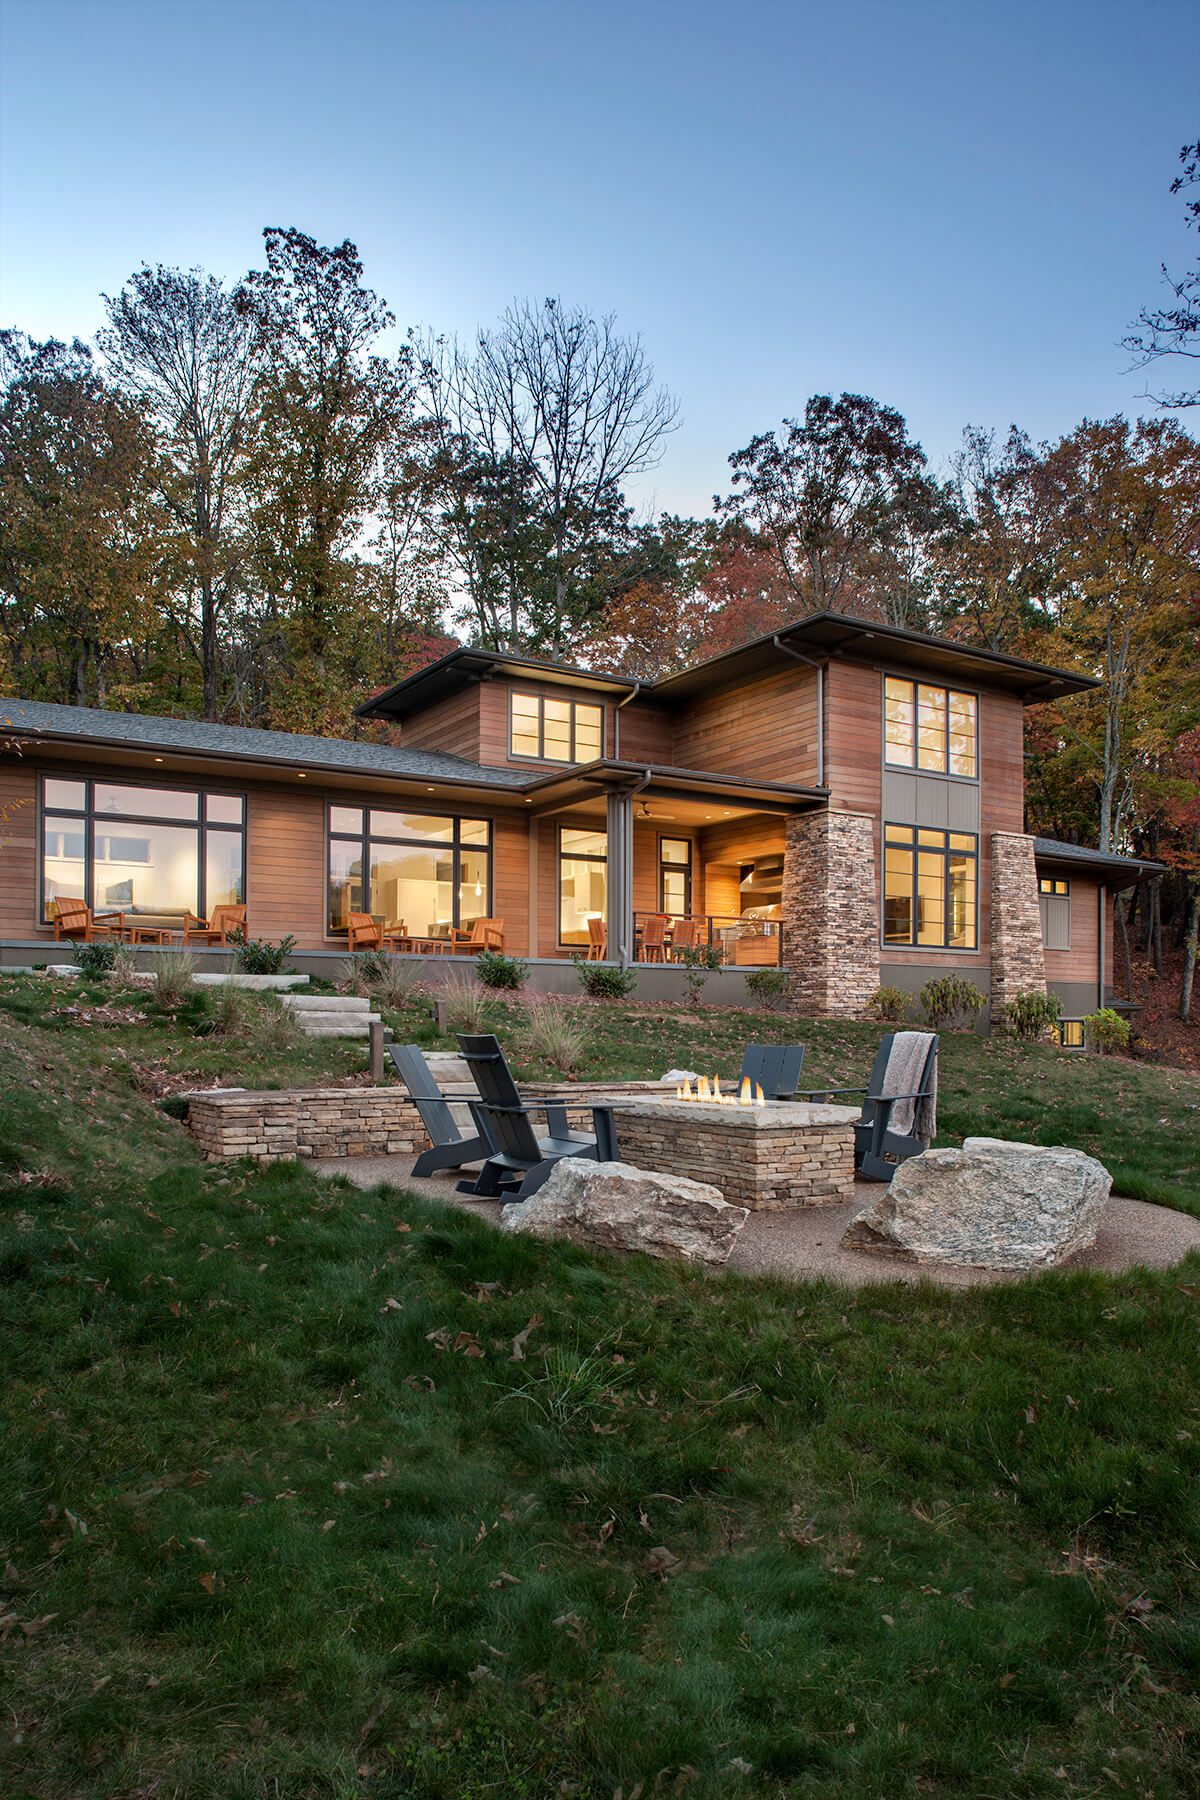 The Cliffs Walnut Cove high end home architectural design project